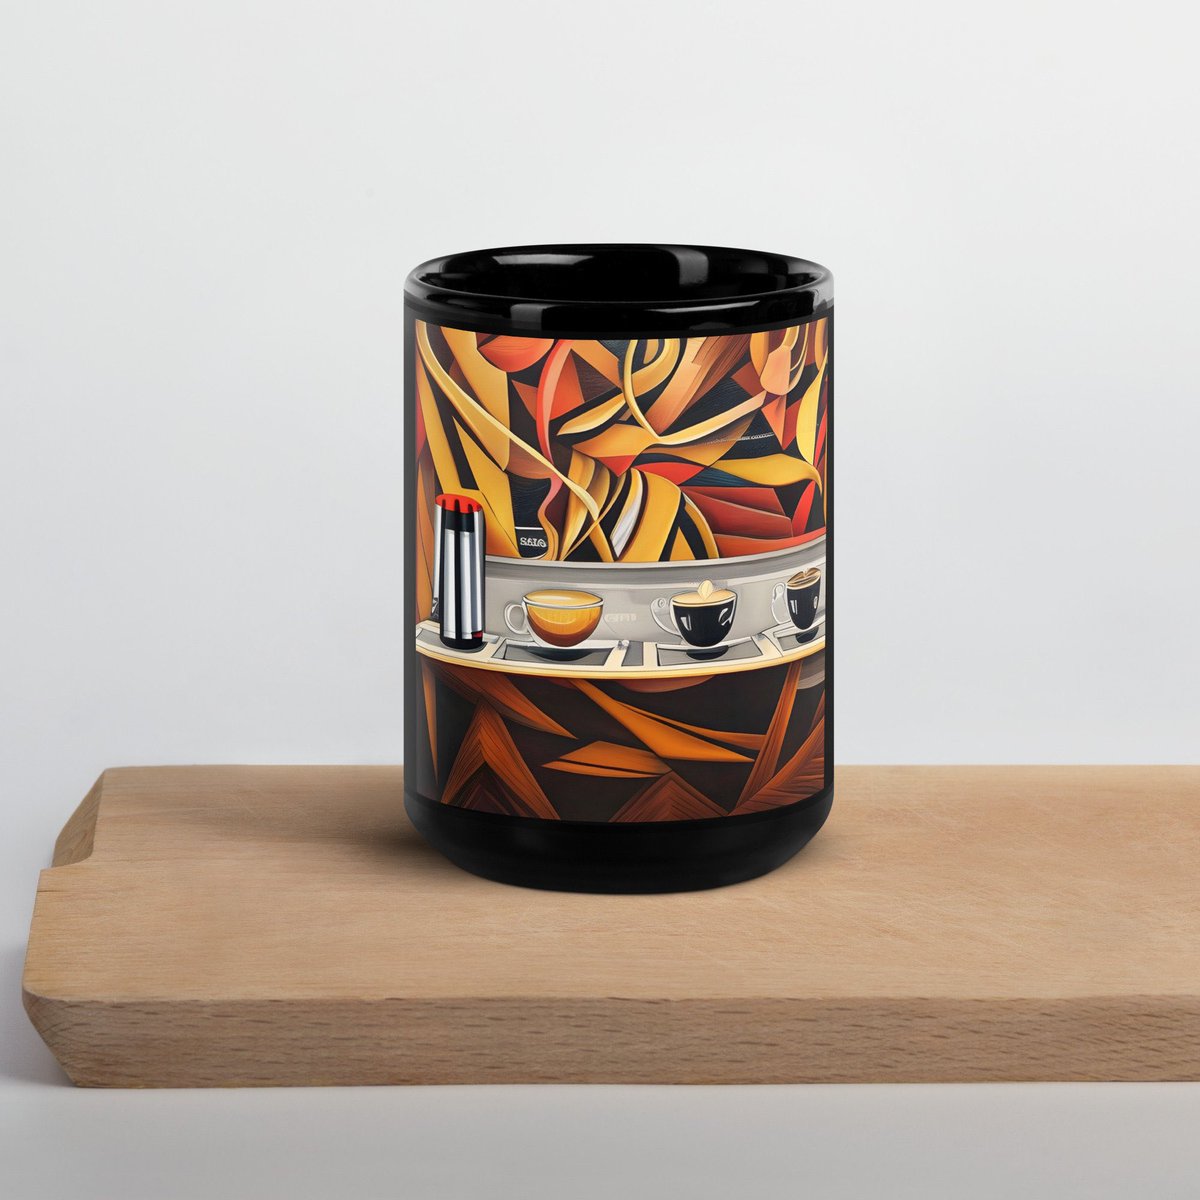 Excited to share this item from my #etsy #art #abstarctart #coffee #coffeeart #coffeeshop #coffeedecor #mug etsy.me/3ivXN1E